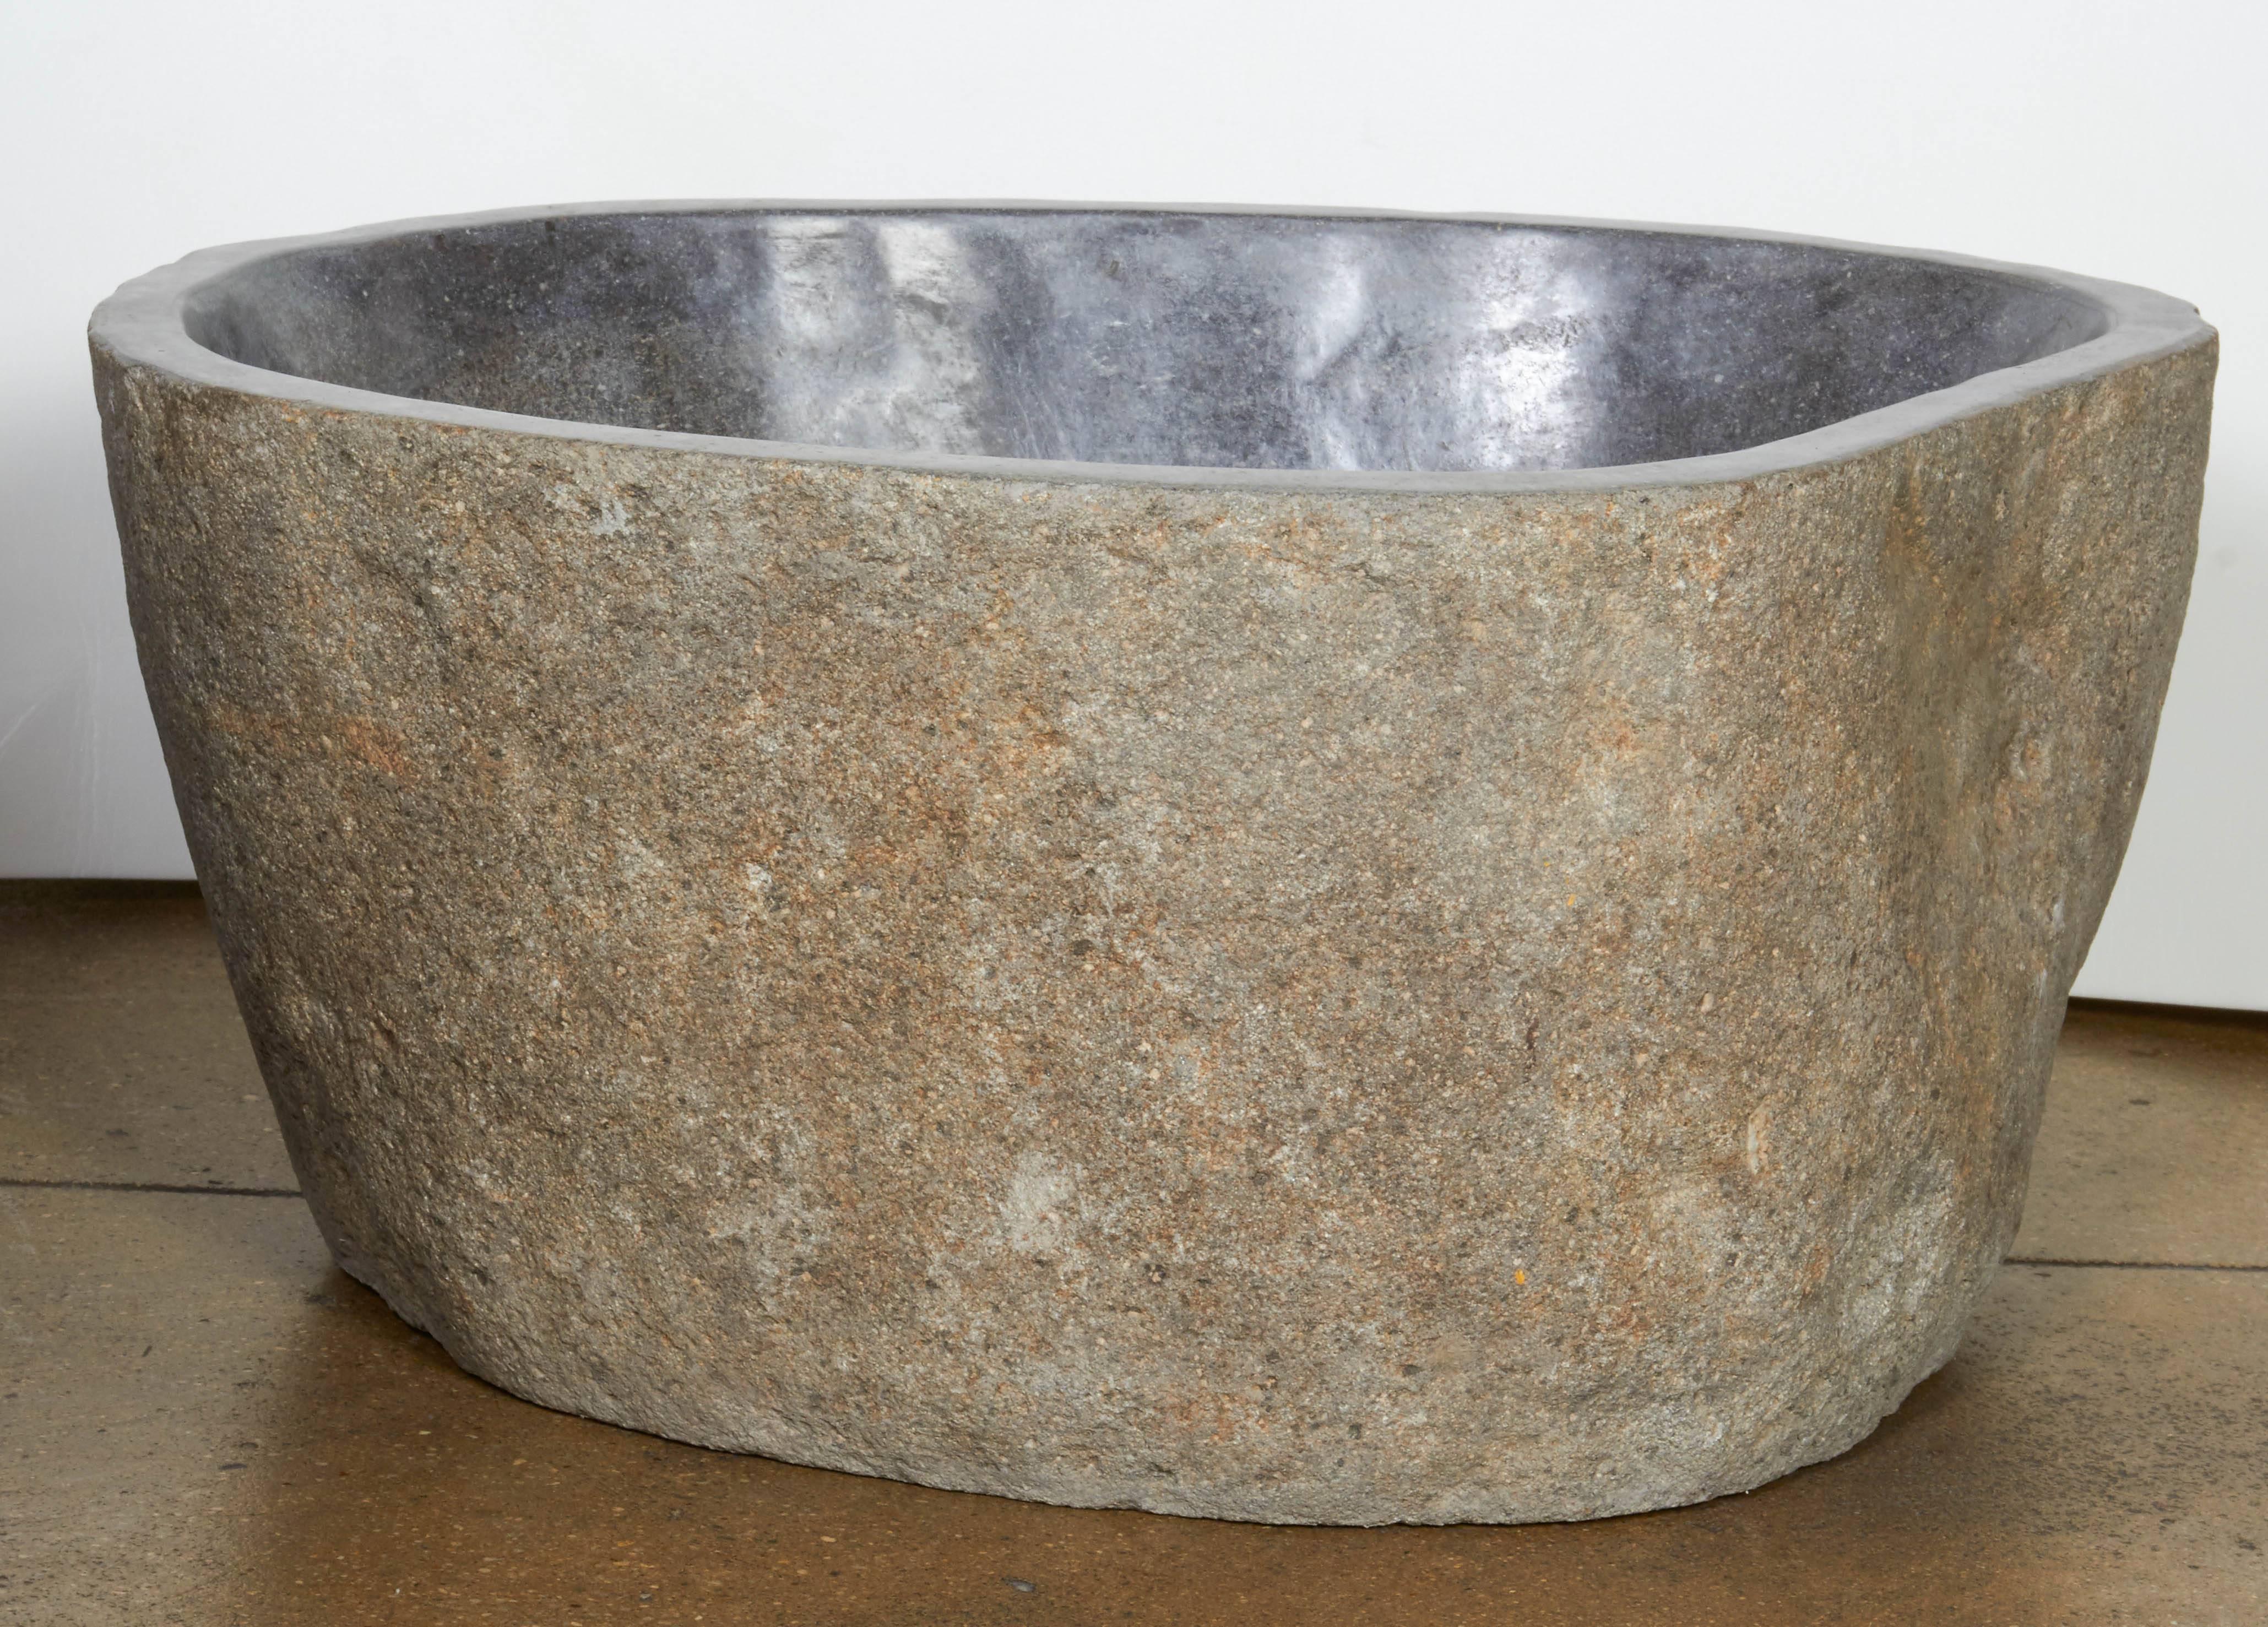 A large carved stone basin or bowl with polished interior. Great to convert into a sink. Smaller sizes available.